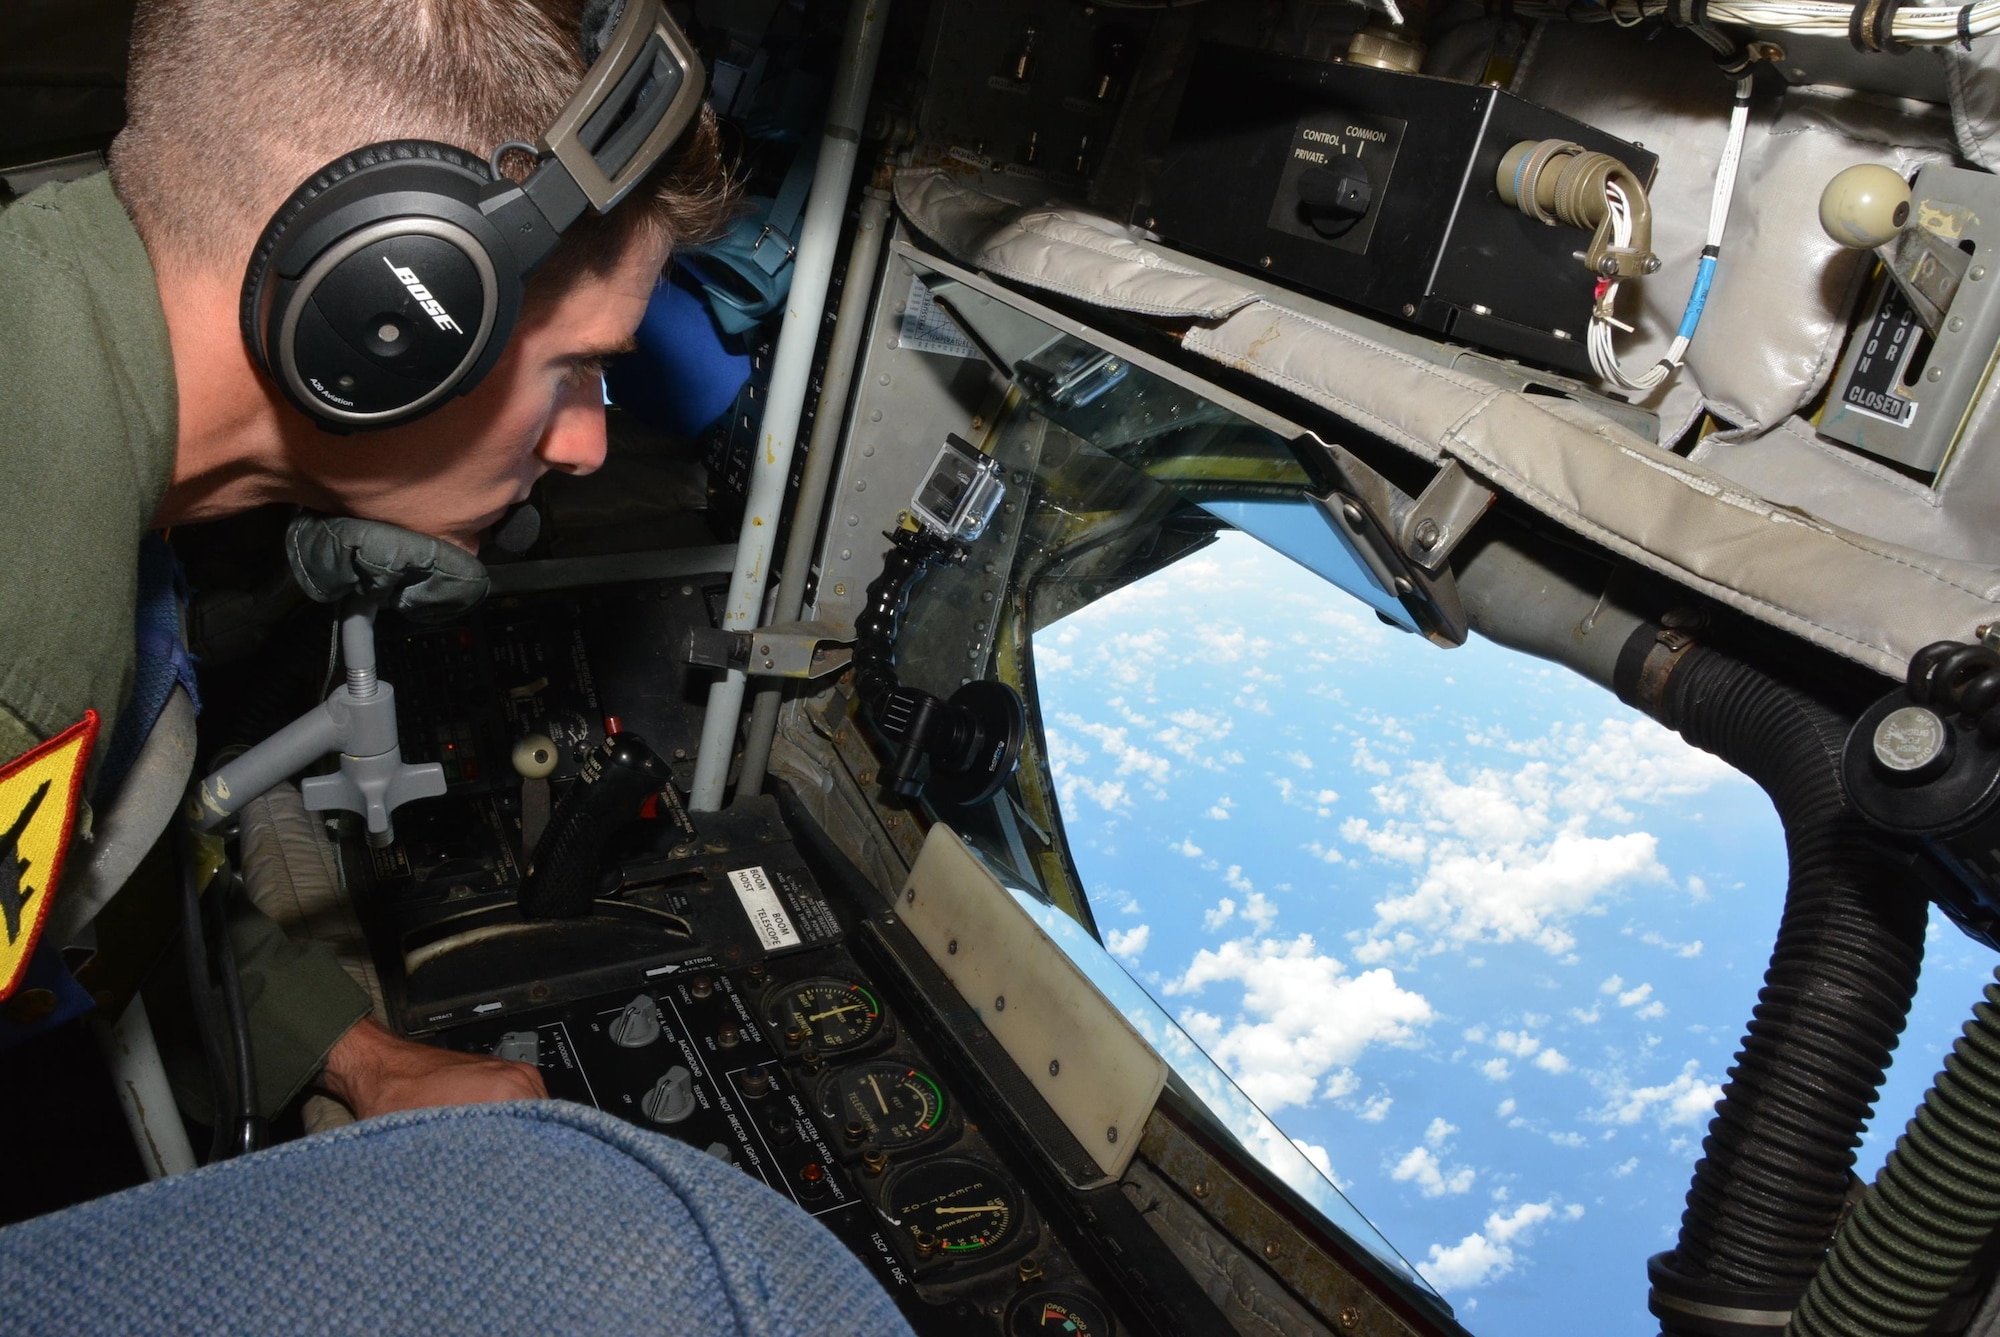 160720-F-EW270-112 JOINT BASE PEARL HARBOR-HICKAM (July 20, 2016) U.S. Air Force Staff Sgt. Tyler Sorrels, a KC-135R Stratotanker boom operator assigned to the 465th Air Refueling Squadron at Tinker Air Force Base, Okla., prepares the refueling boom to offload 49,700 lbs. of fuel to six U.S. Navy F-18 Hornets and two Canadian CF-18 Hornets over the Pacific Ocean as part of Rim of the Pacific 2016. (U.S. Air Force photo/Tech. Sgt. Lauren Gleason)